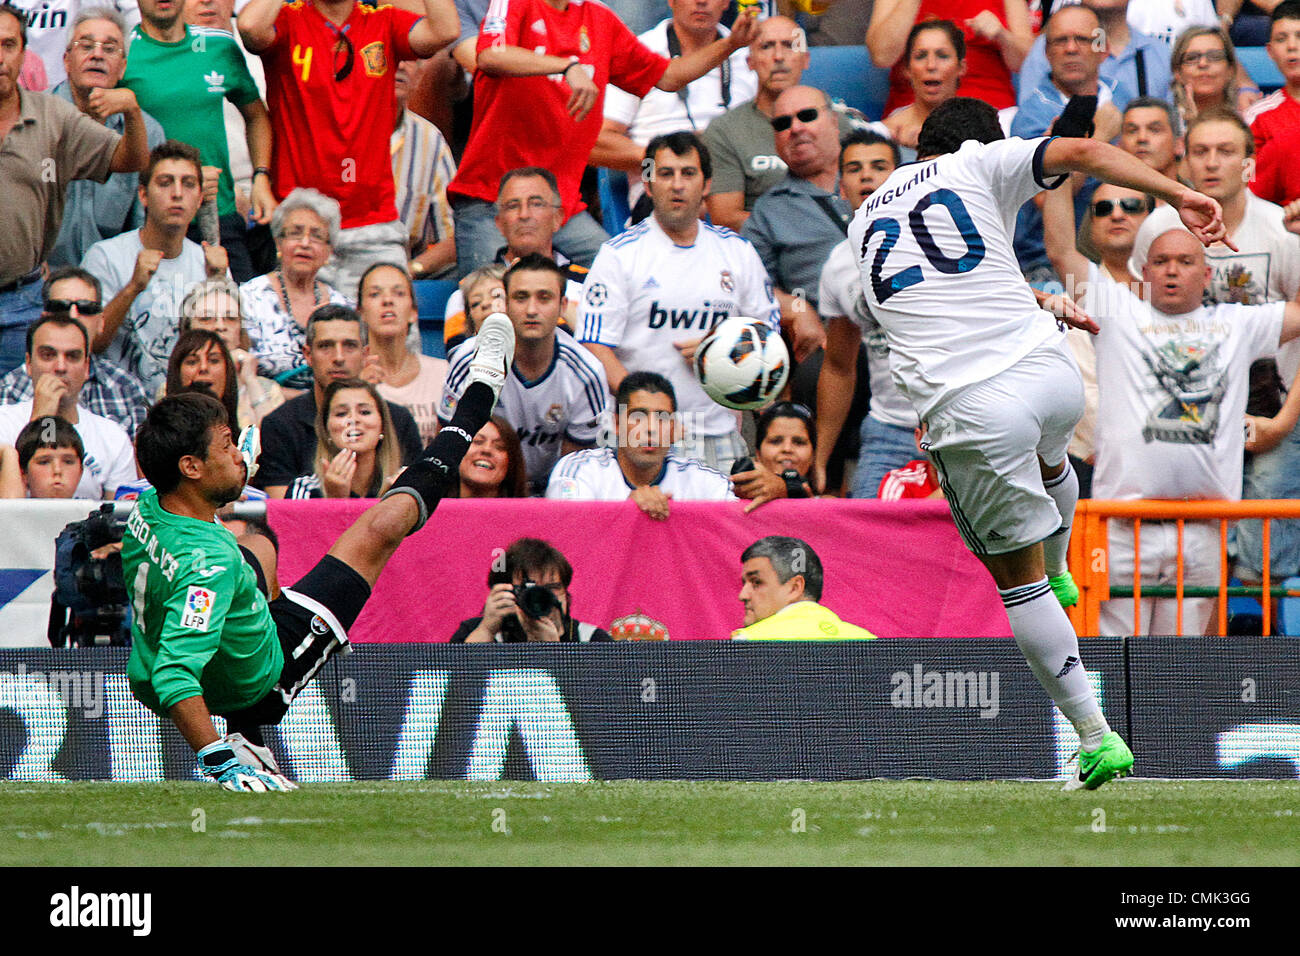 19/08/2012 - Spain Football, La Liga / Matchday 1 - Real Madrid vs. Valencia CF - Higuain shoots the ball in front of goalkeeper diego alves to beat him for 1-0 for real madrid Stock Photo